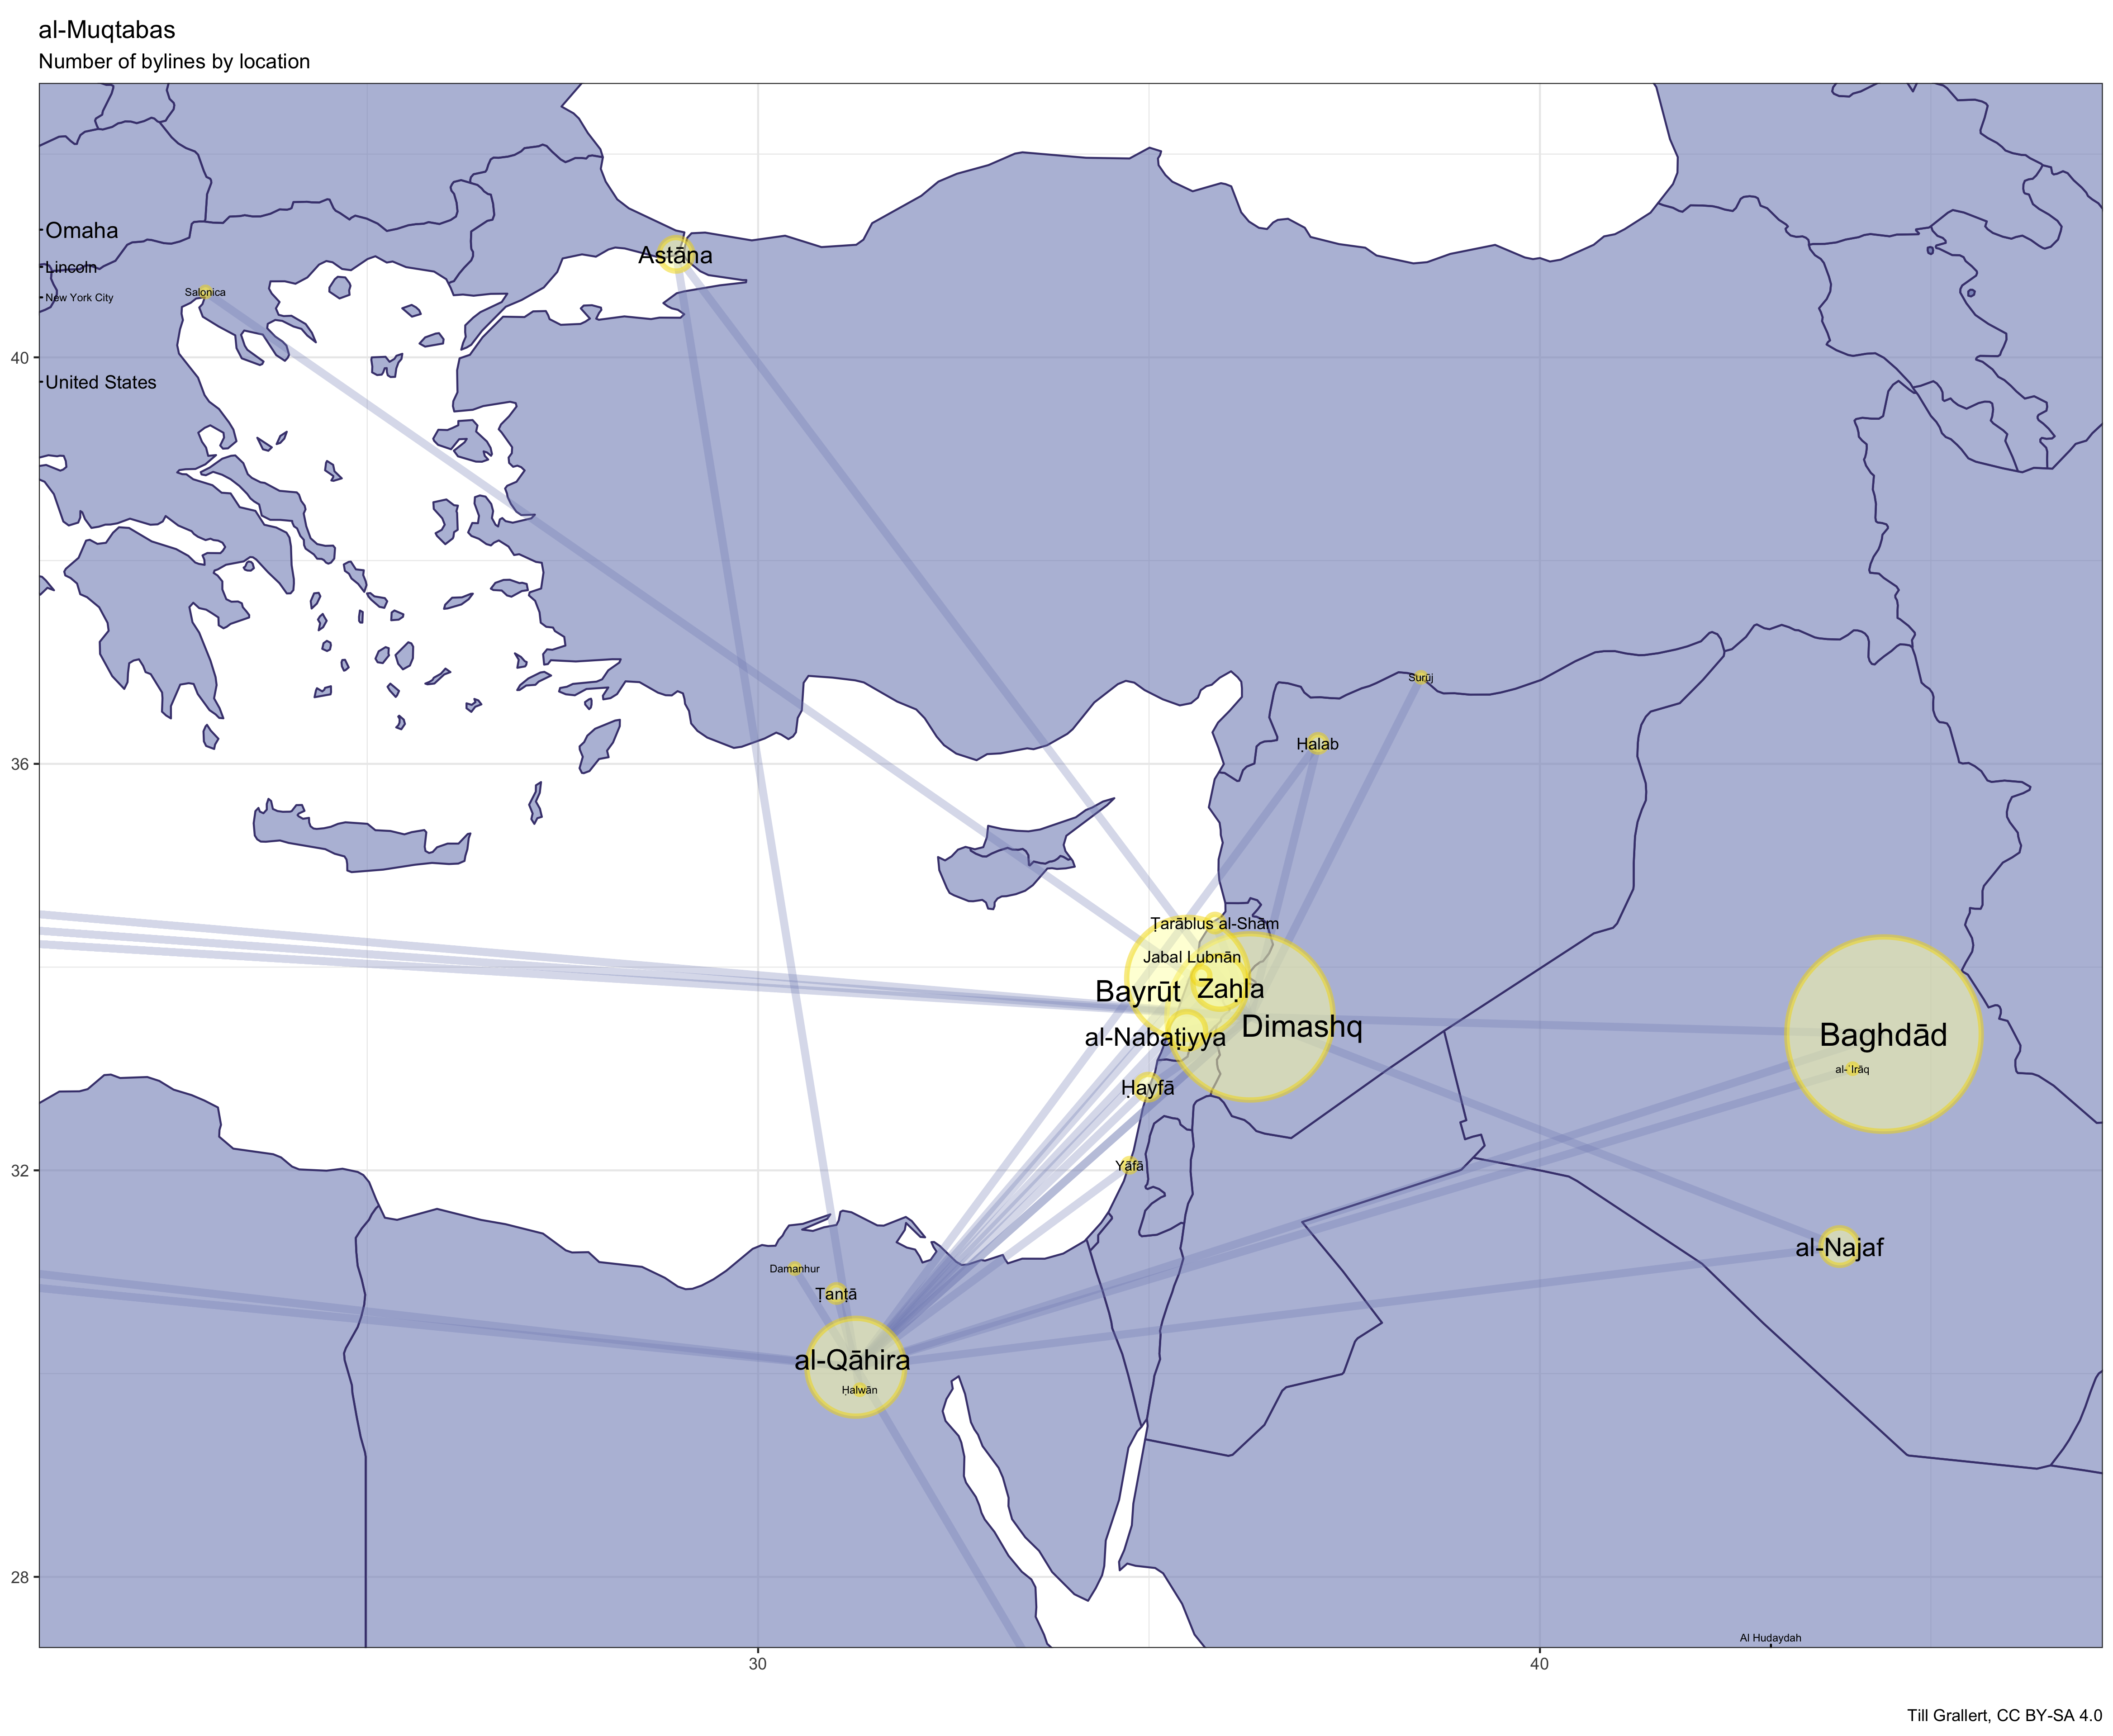 Fig.3: Locations in bylines in *al-Muqtabas*